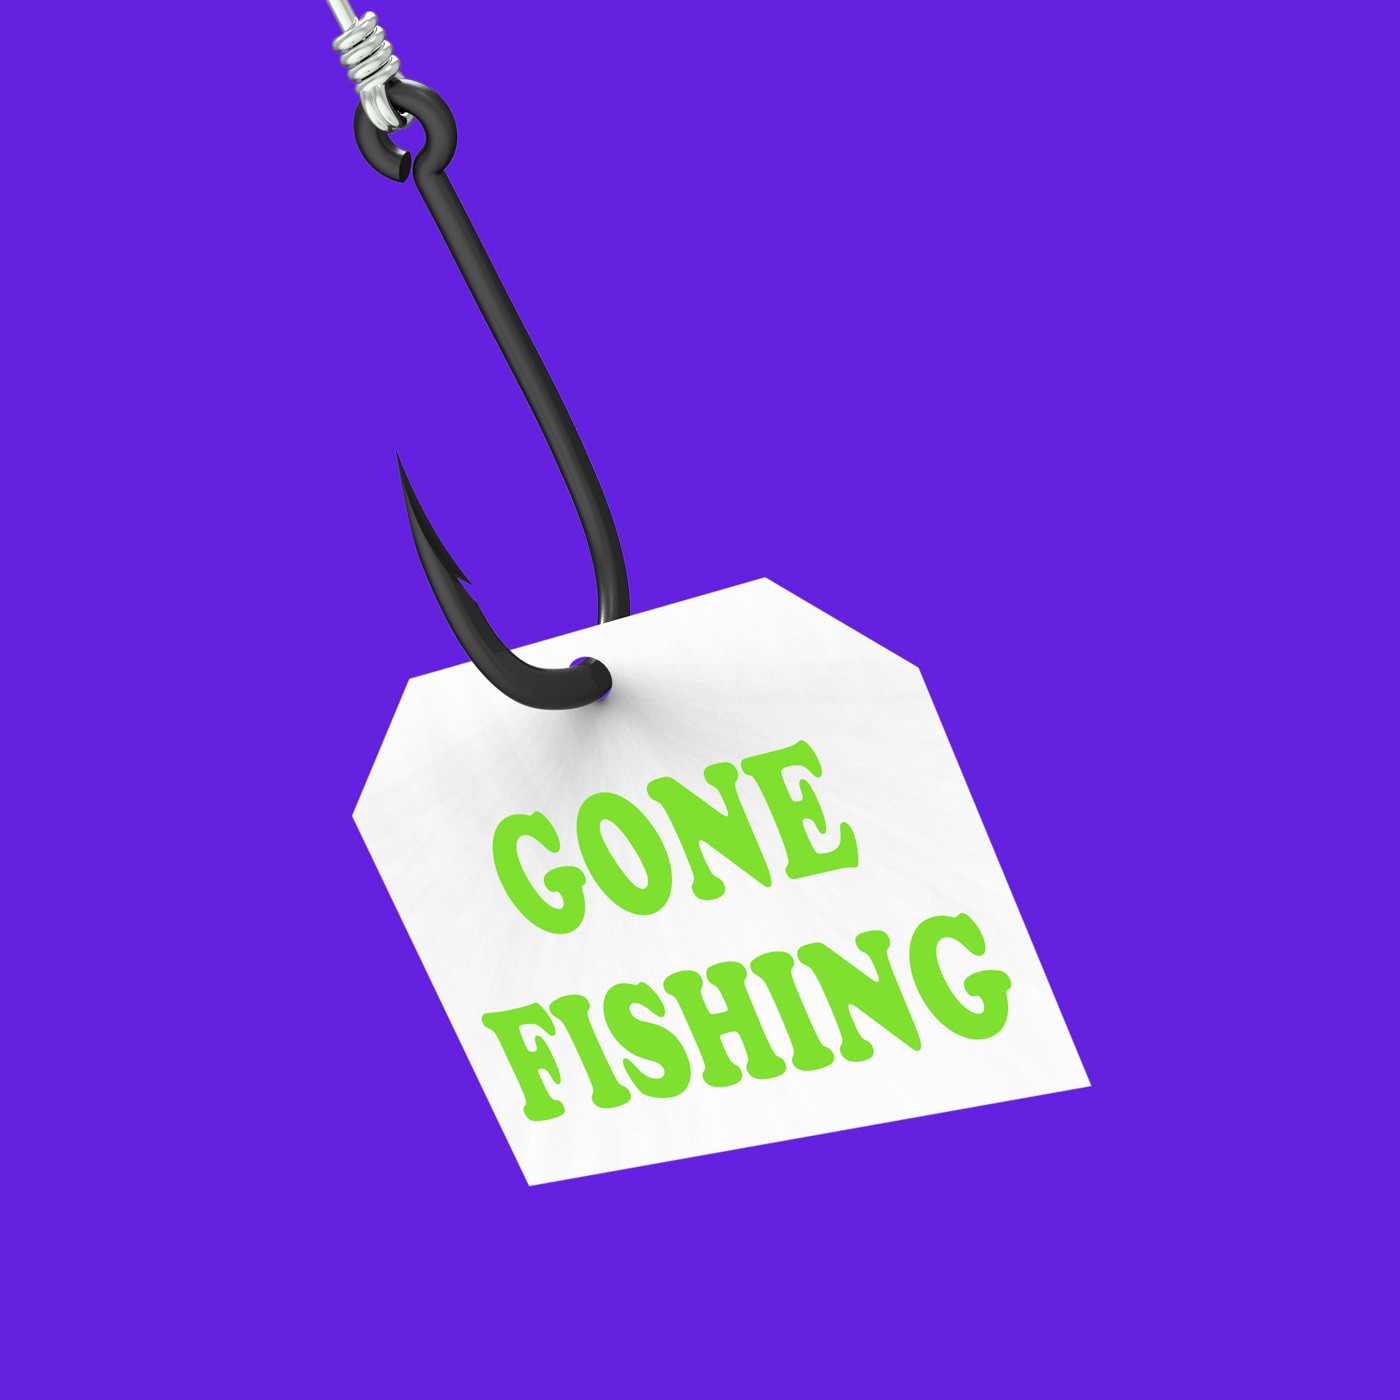 Gone fishing on hook shows relaxing get away and recreation photo